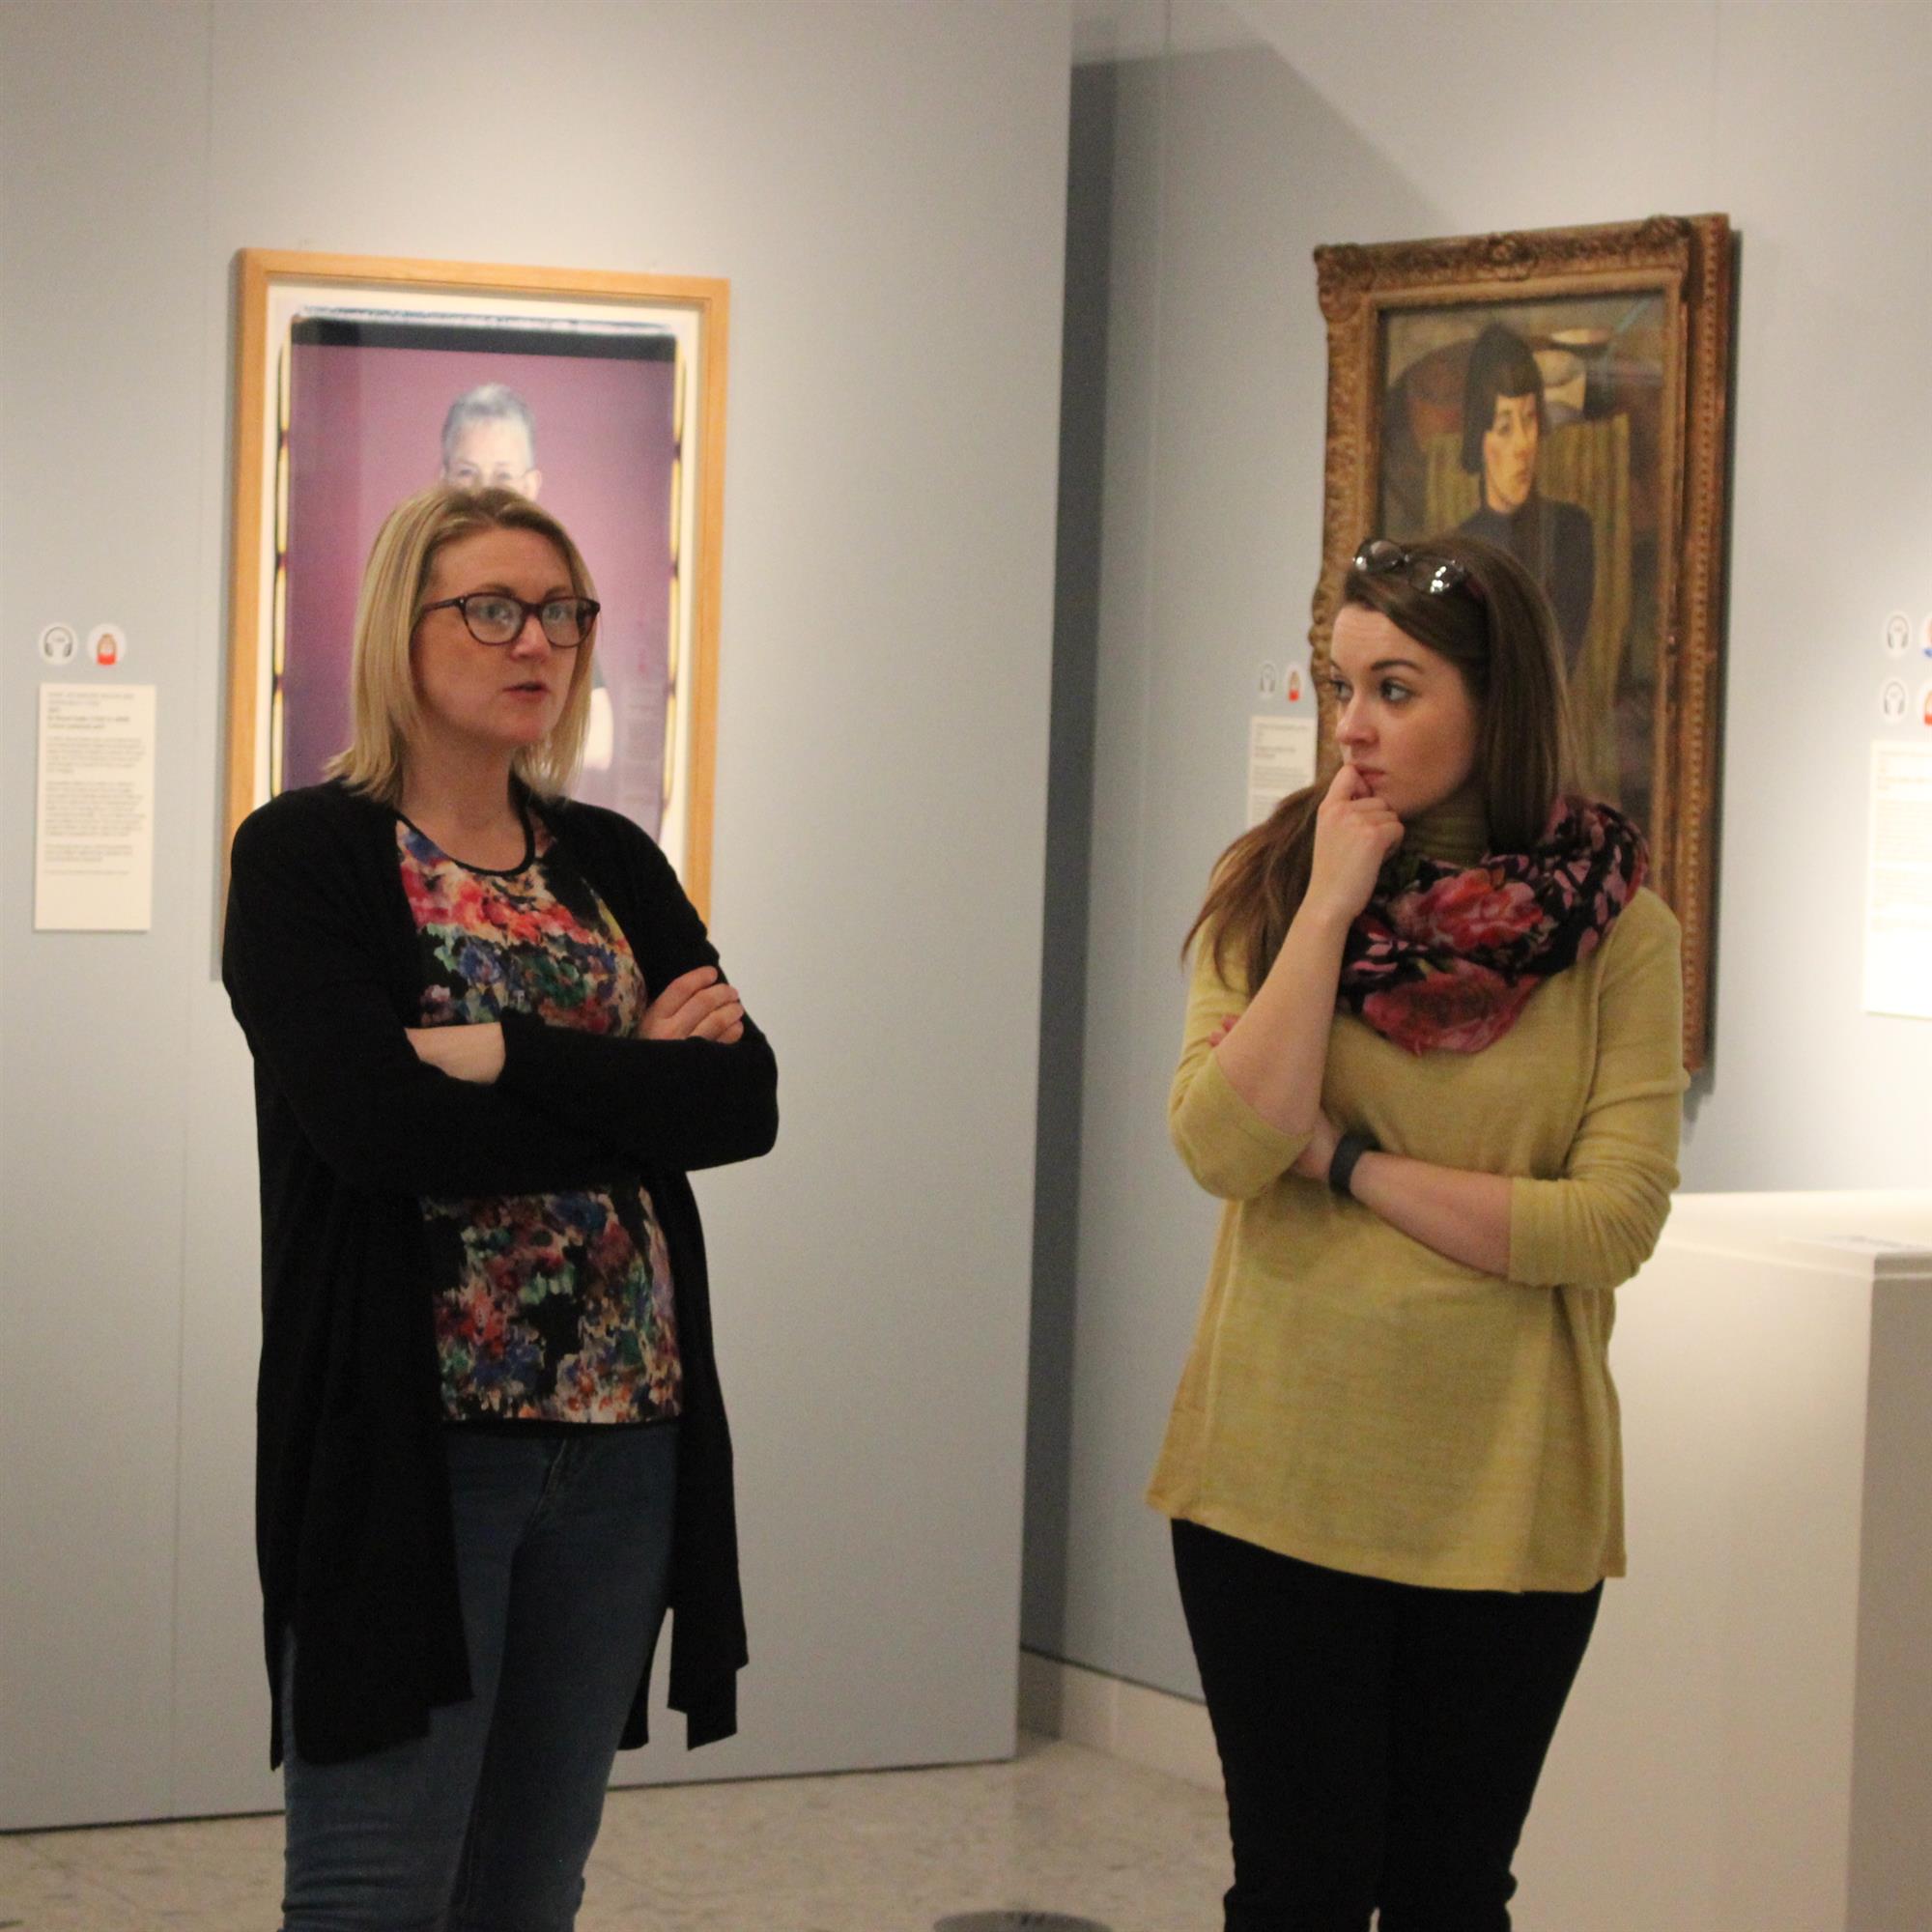 Two thoughtful women stand in front of portraits